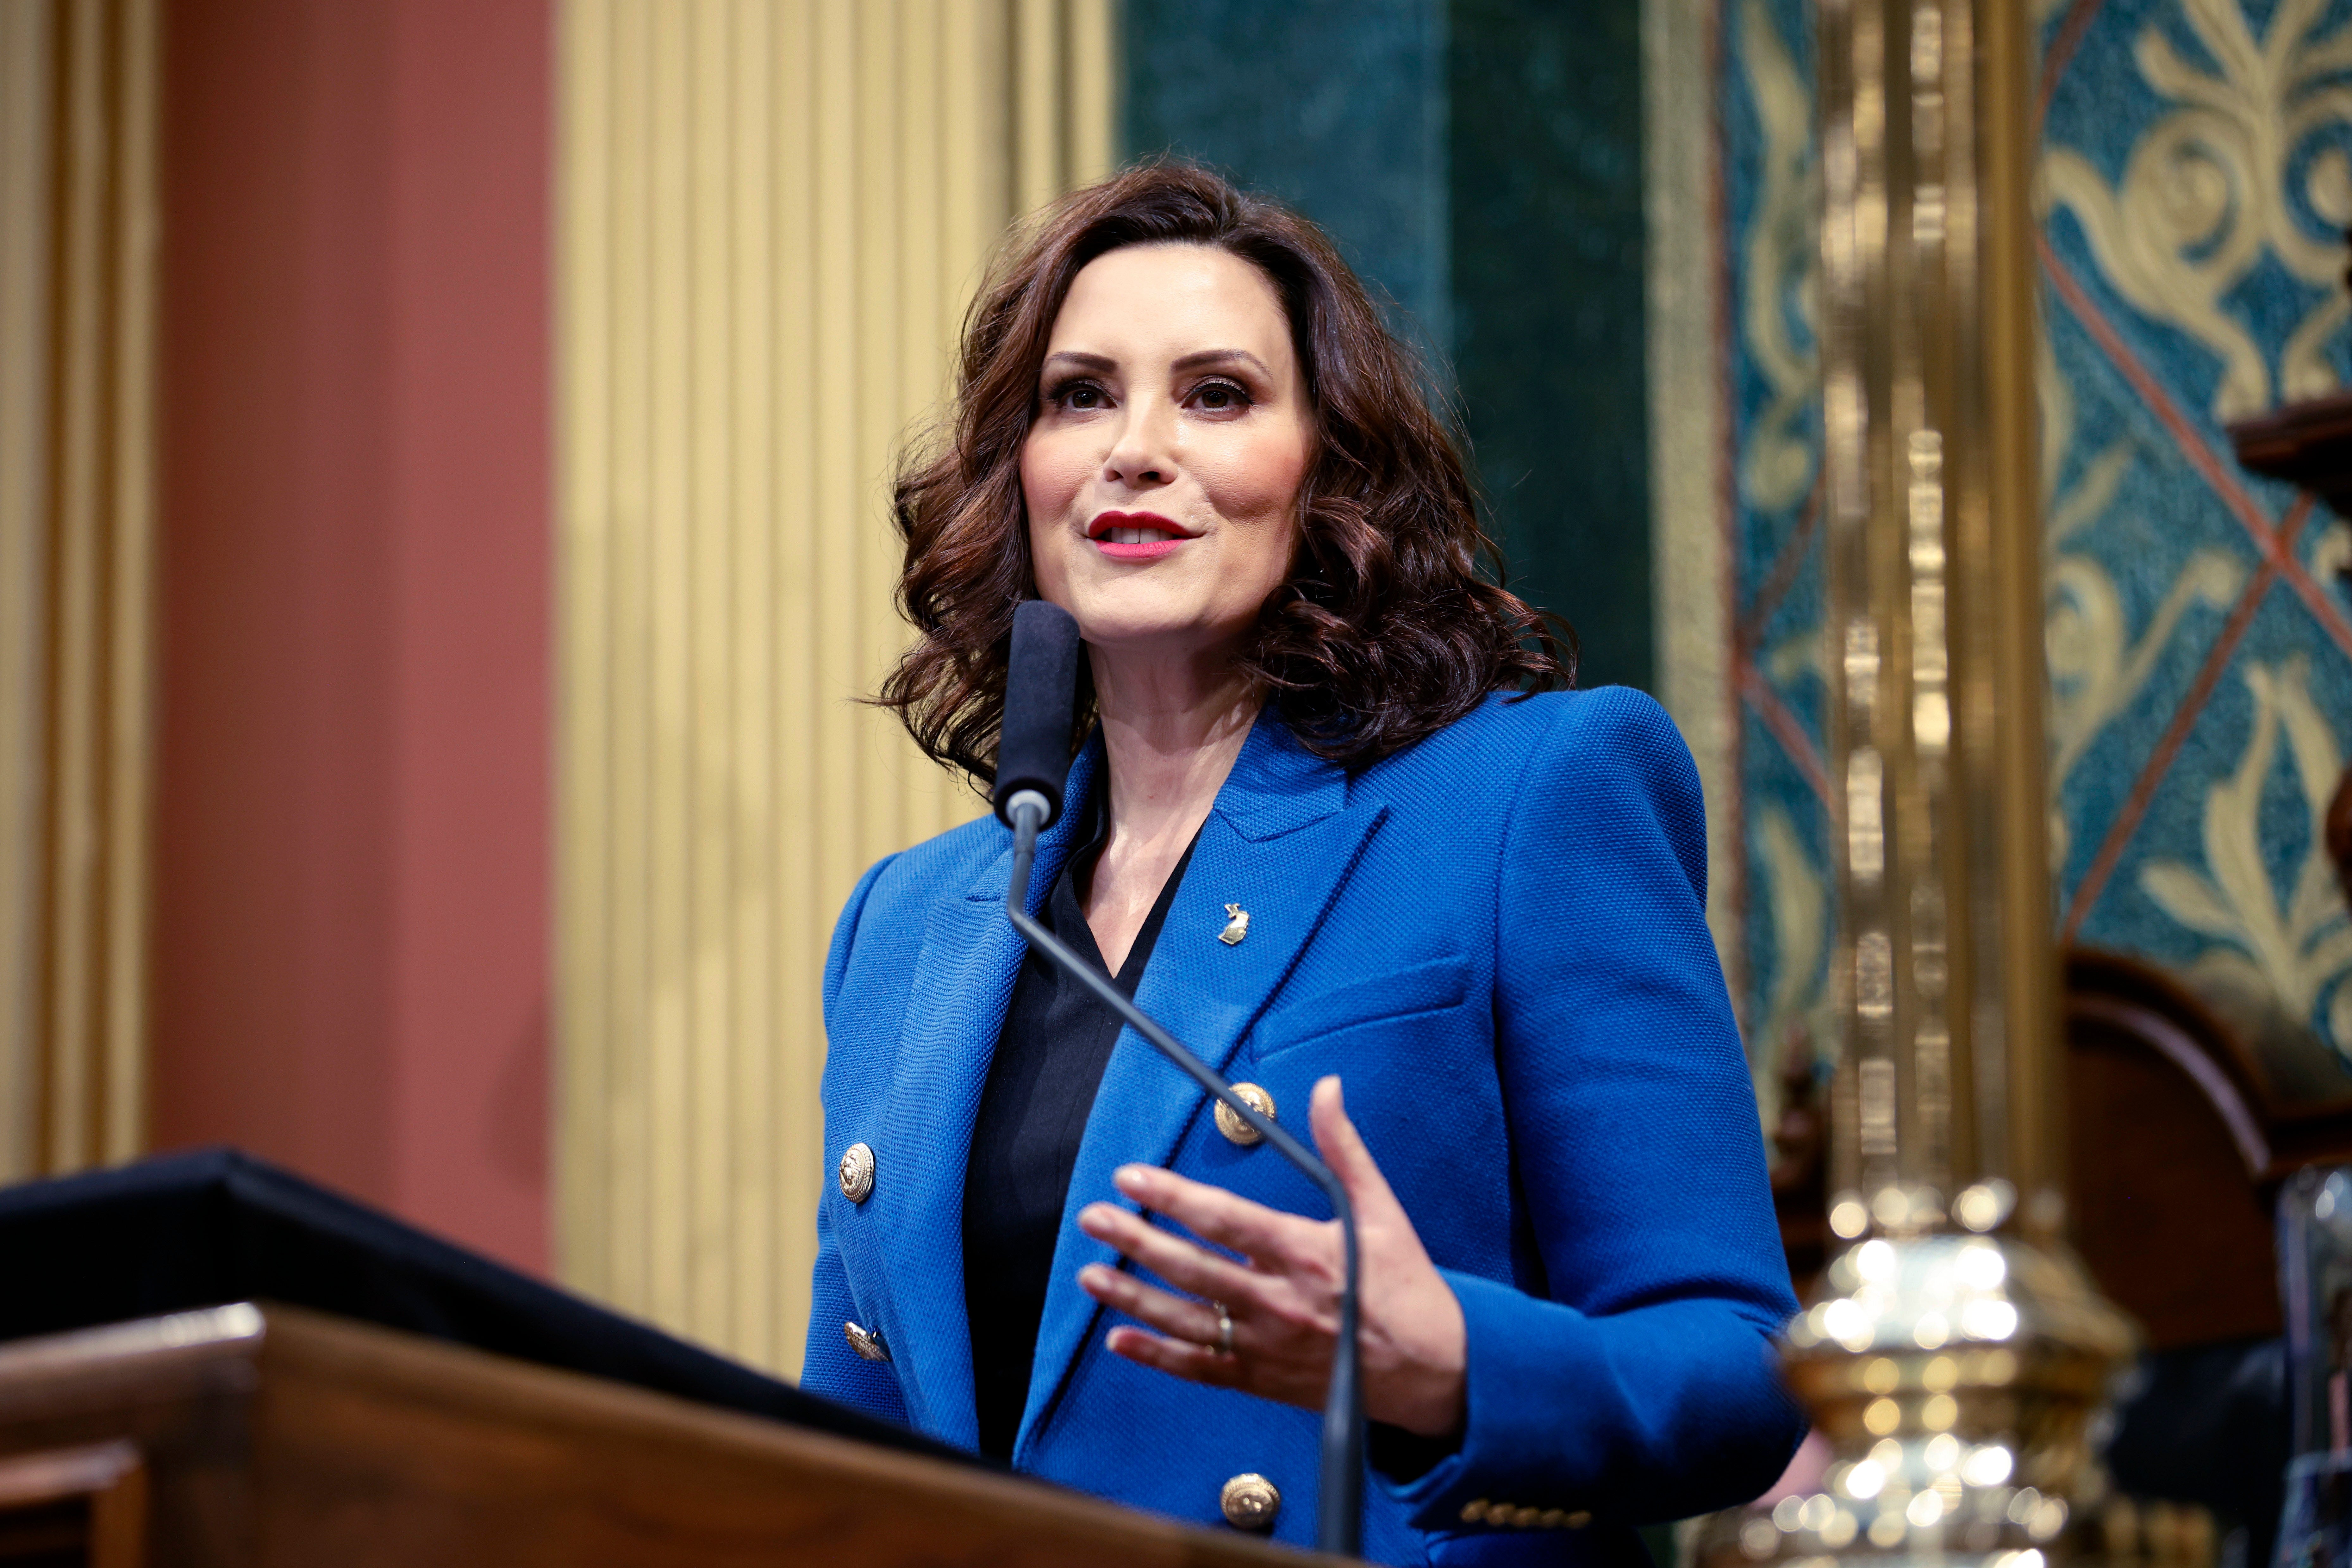 Gretchen Whitmer is seen as one of the leaders of the moderate wing of the Democratic Party